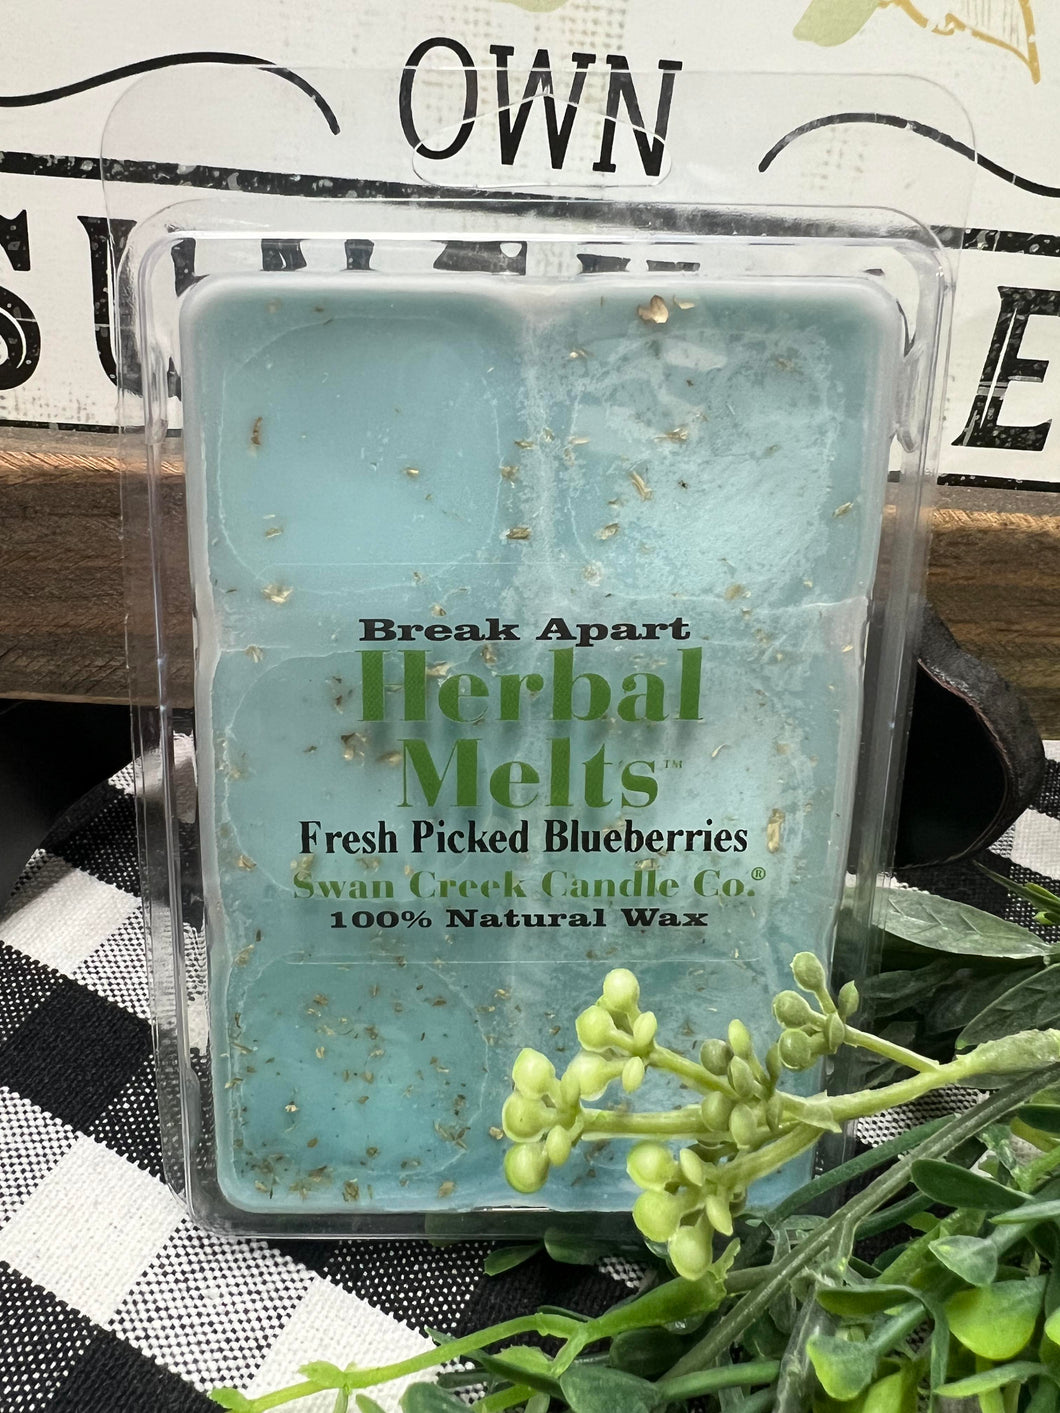 Swan Creek Candle Co. Fresh Picked Blueberries Herbal Melts